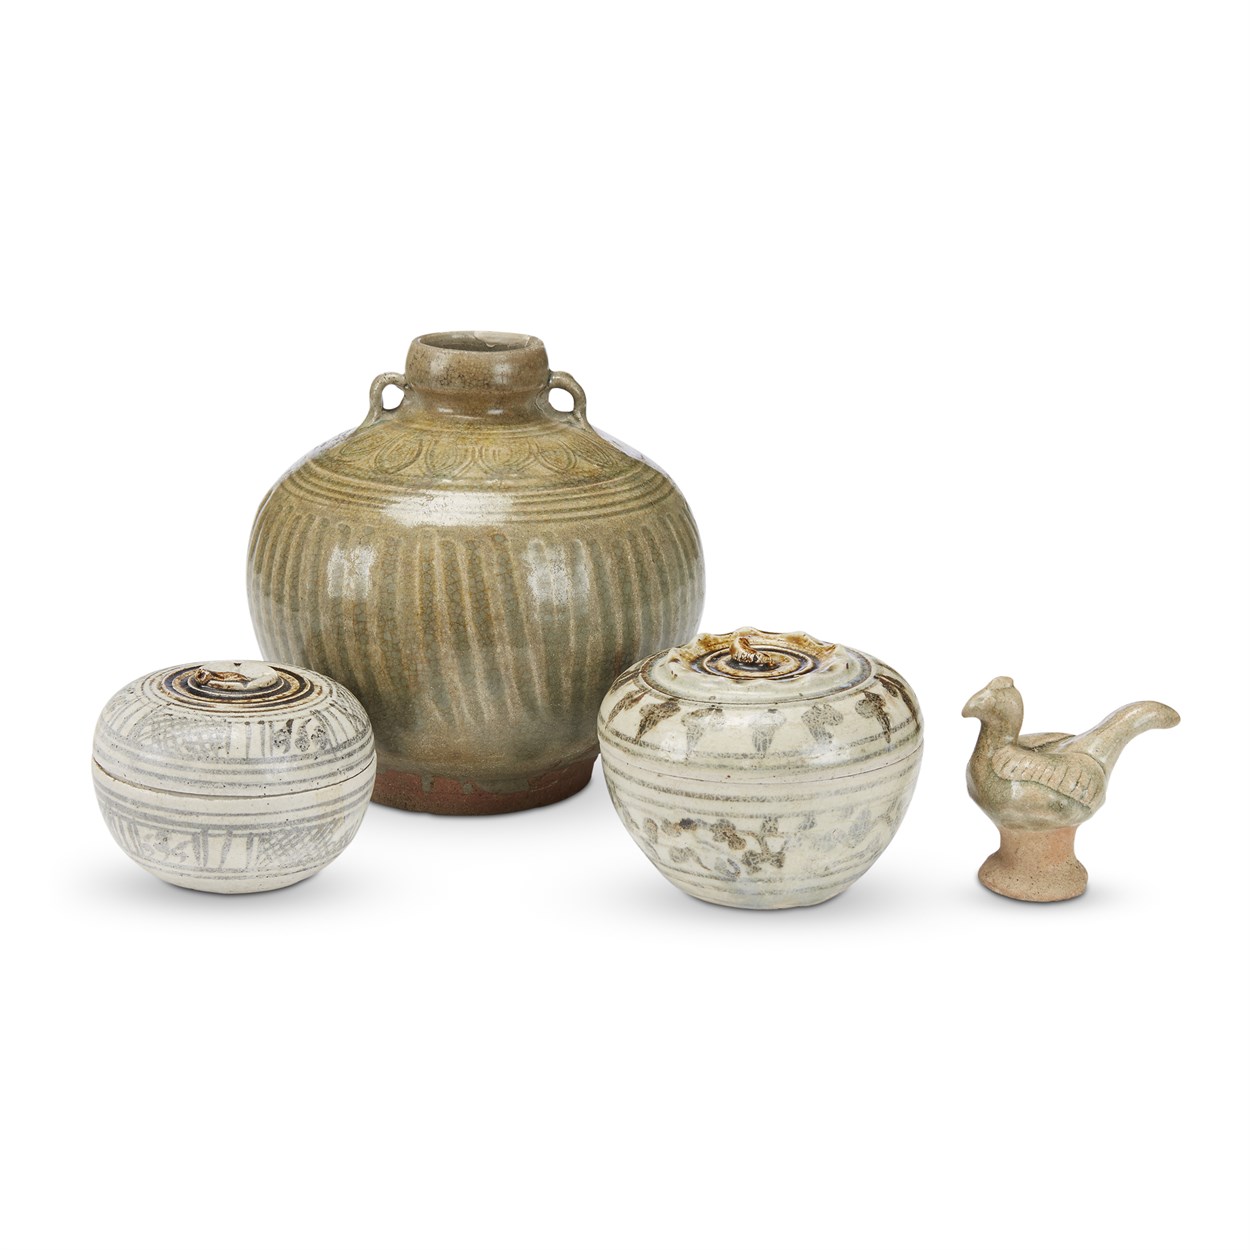 Lot 192 - A Thai celadon globular jar, two iron brown-decorated boxes, and a celadon-glazed chicken